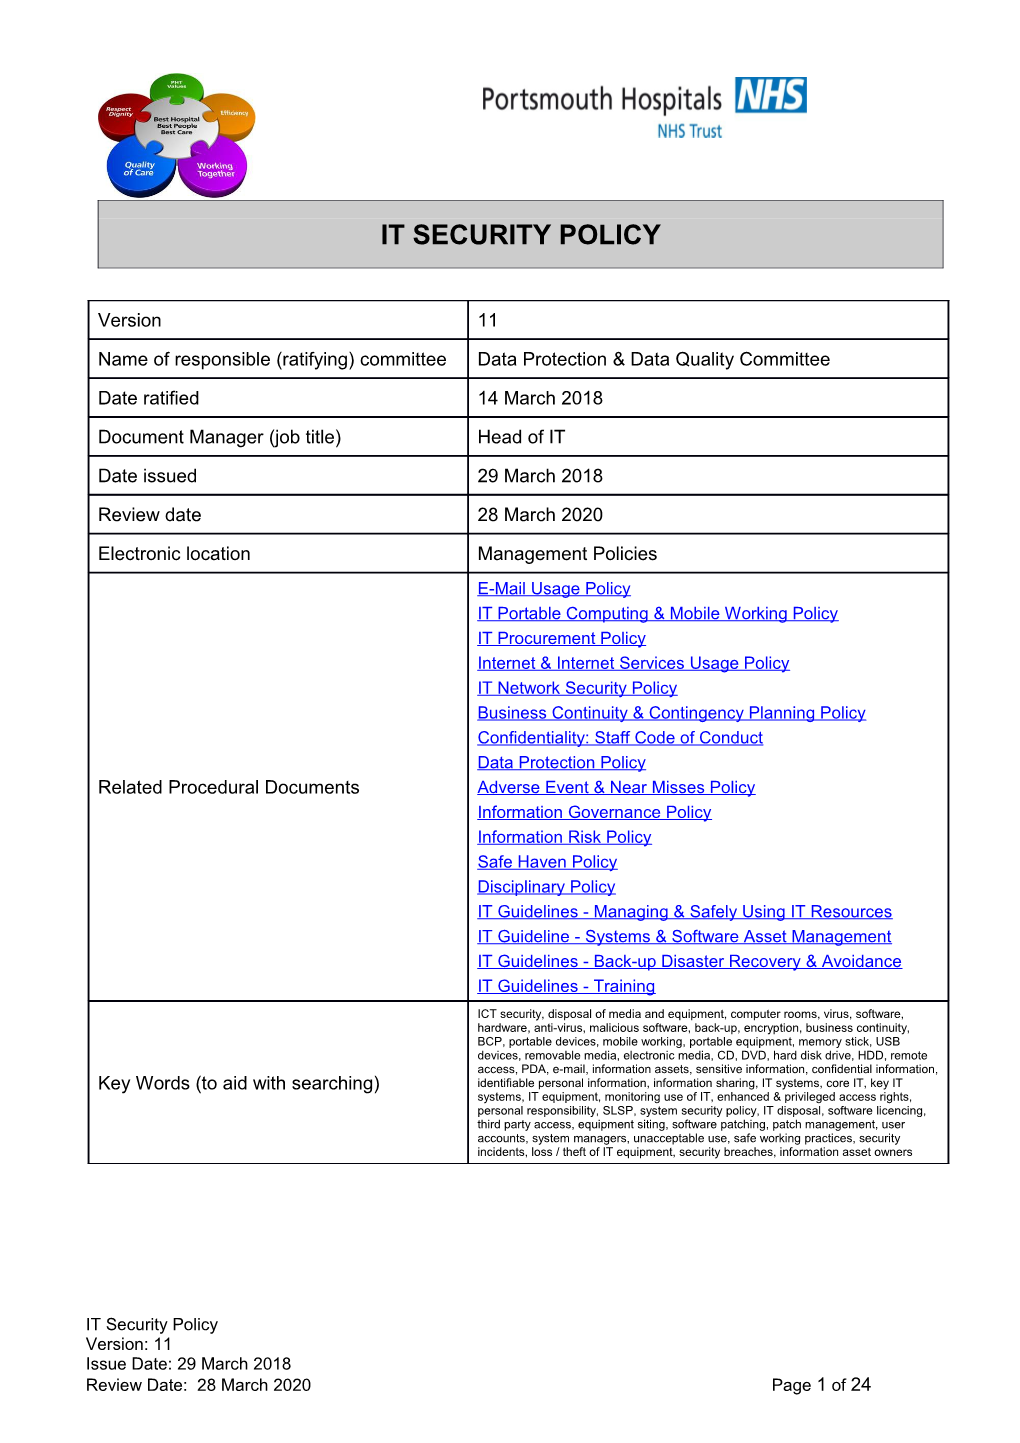 It Security Policy